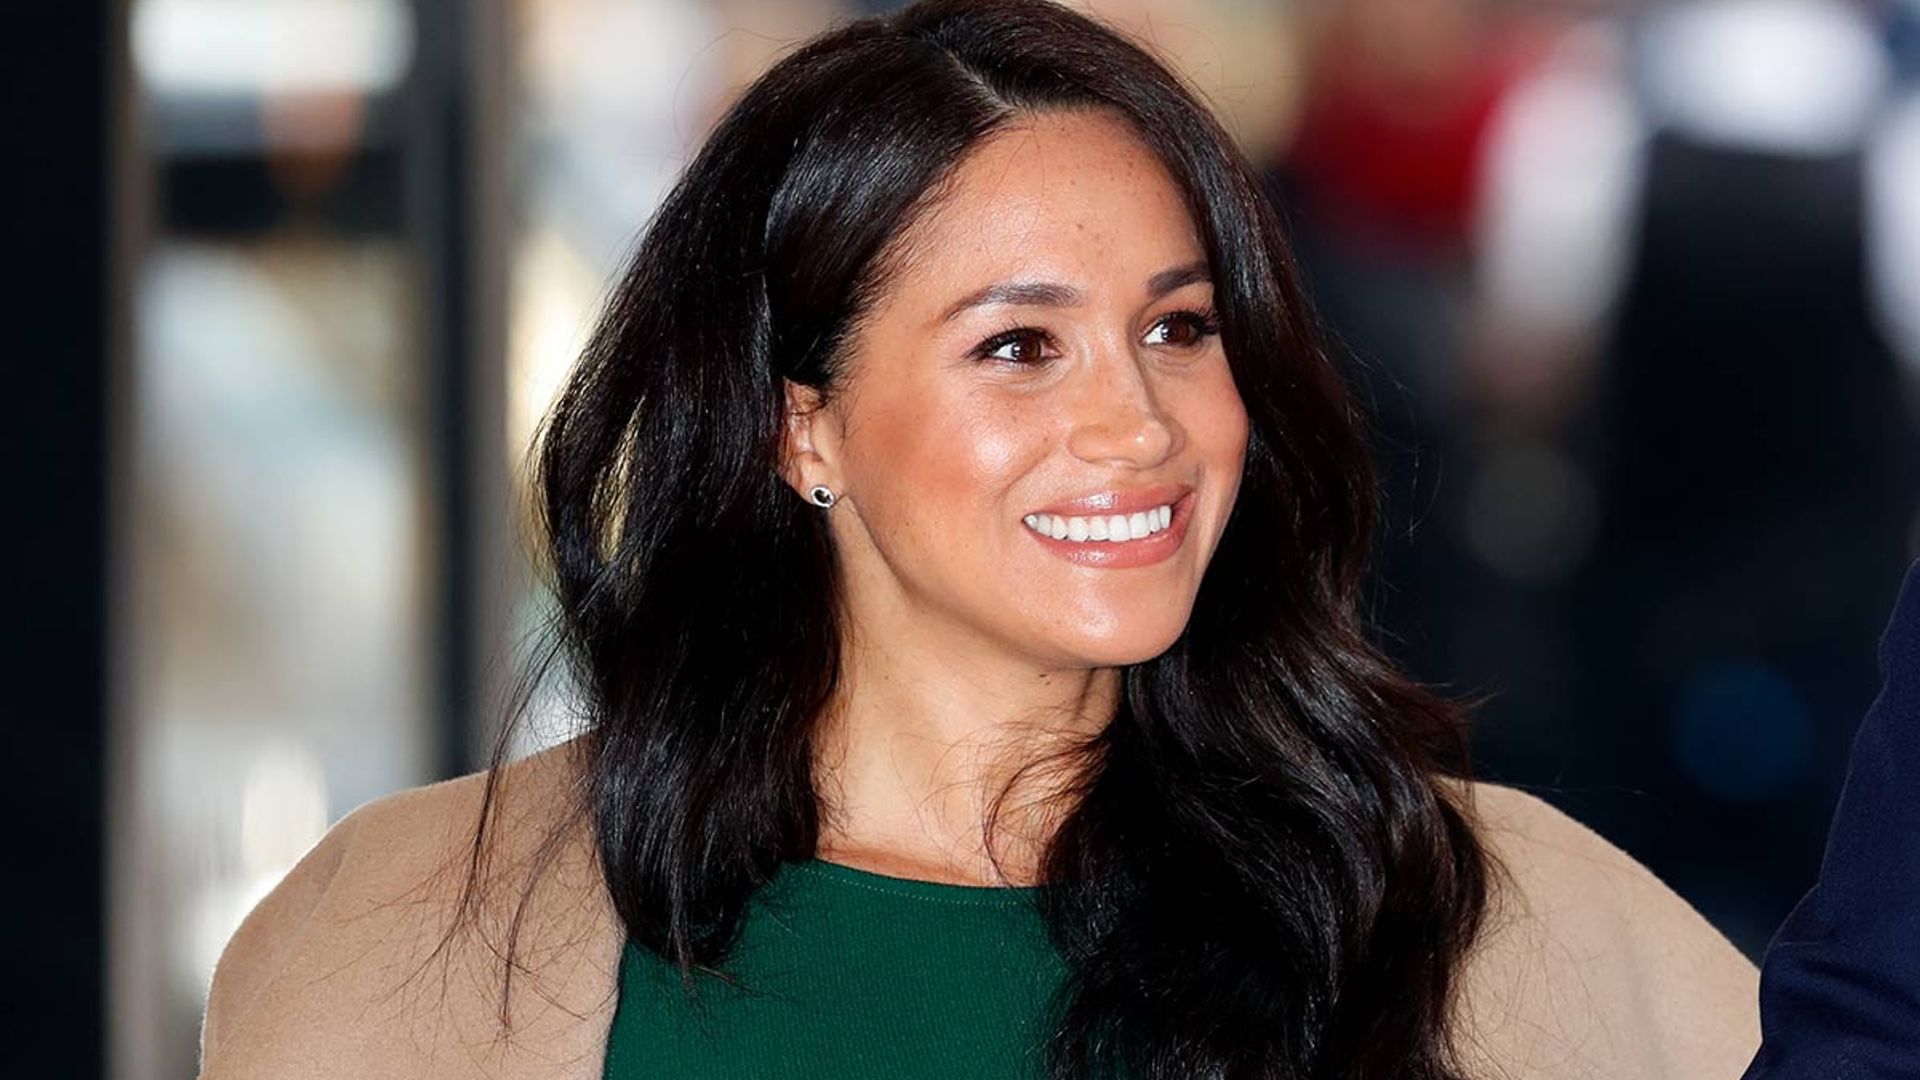 Meghan Markle's exact skinny jeans are on sale for just $27 - that's 65% off